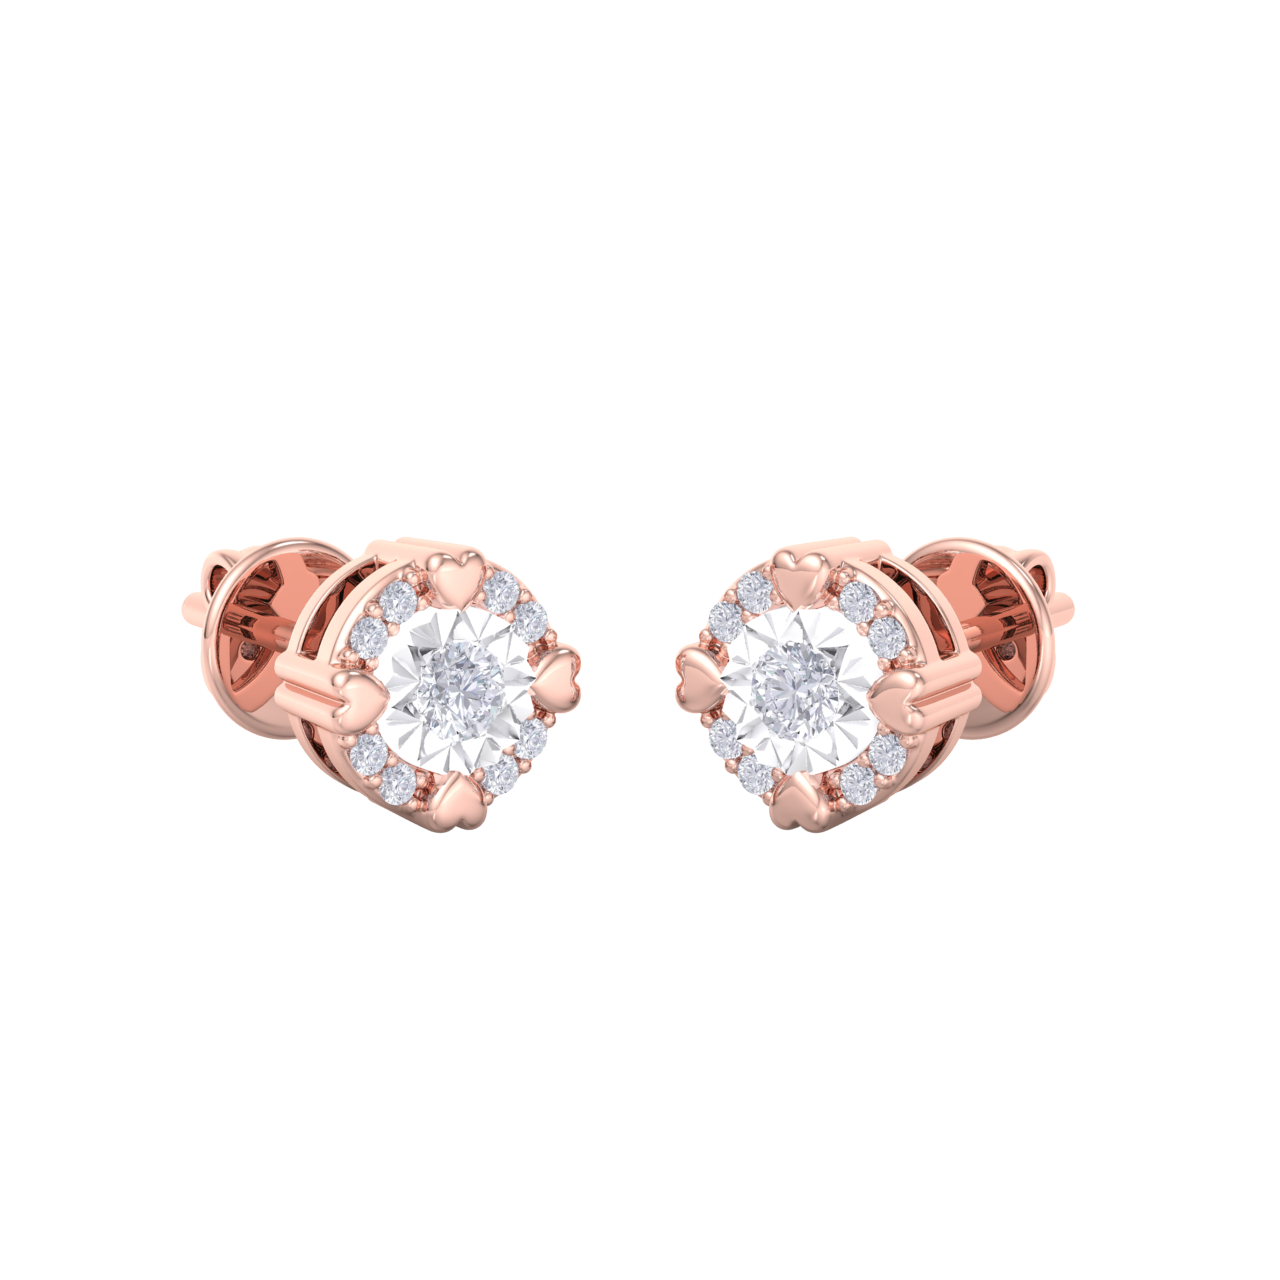 Halo earrings with miracle plate in rose gold with white diamonds of 0.20 ct in weight